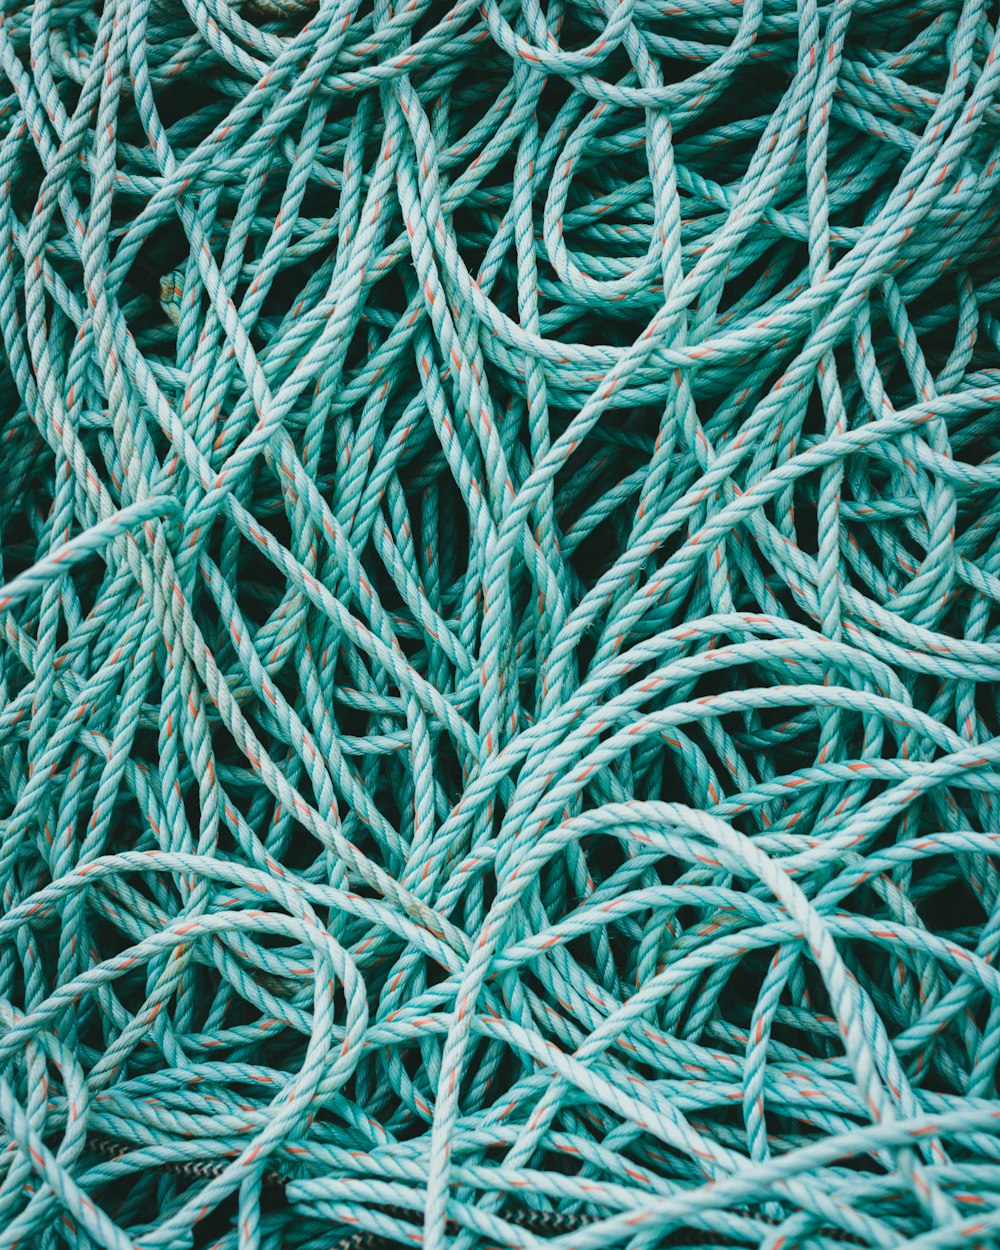 green and black rope on white surface